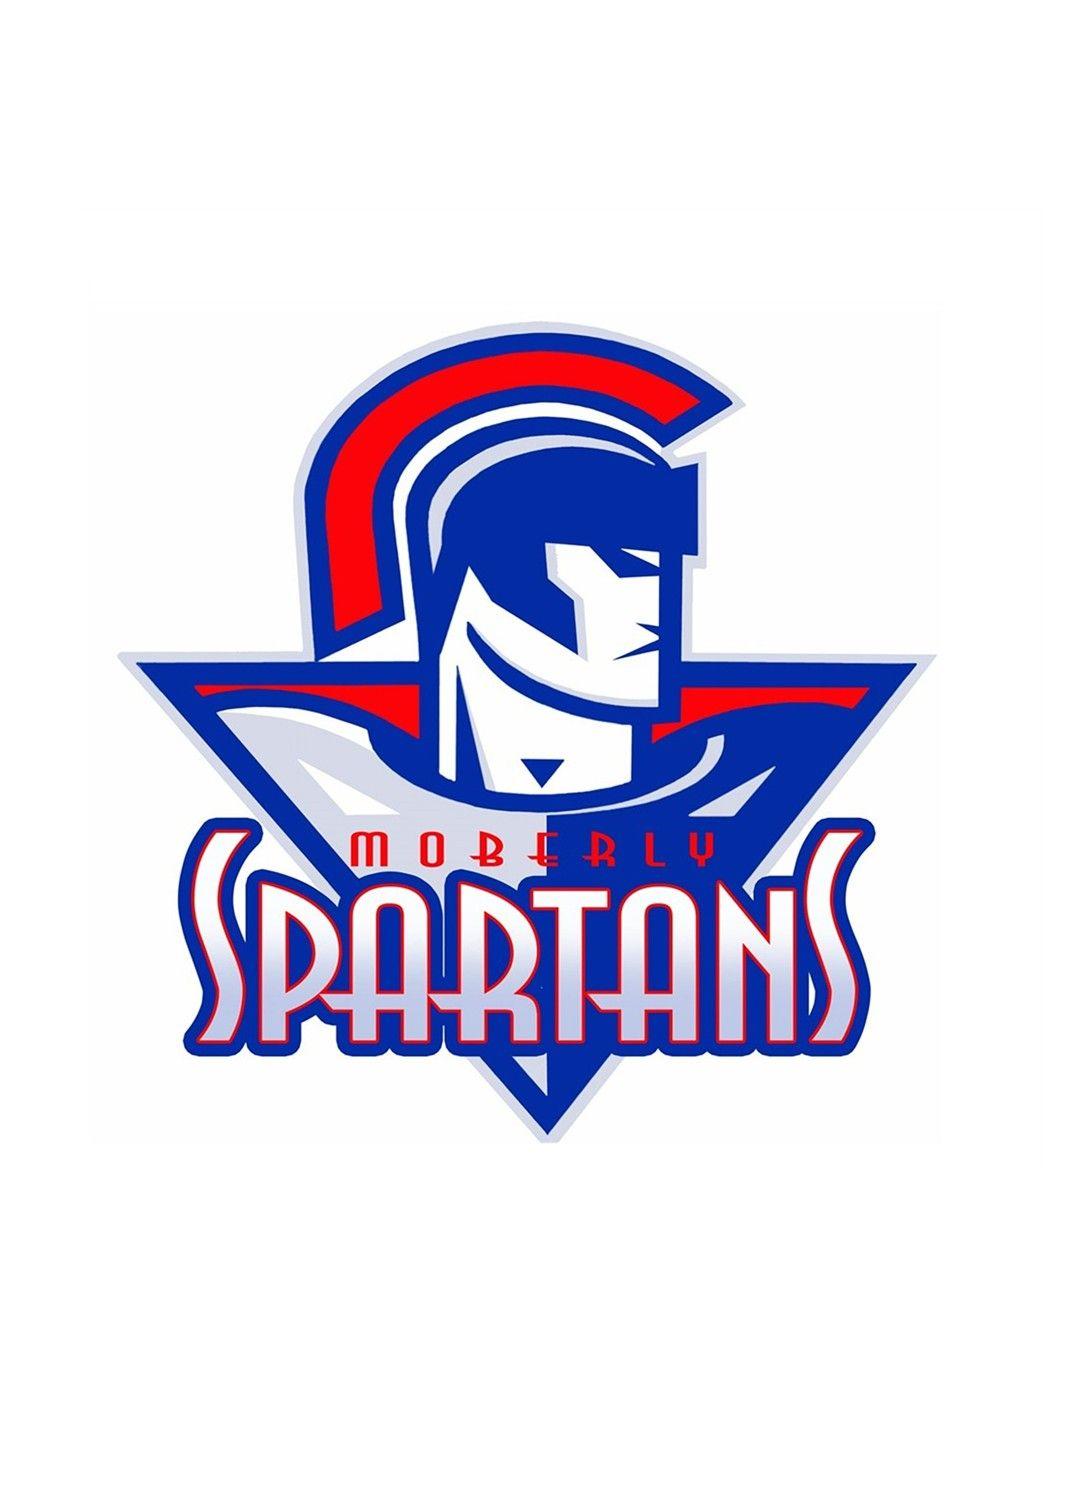 Red and Blue in High School Logo - MSHSAA Moberly High School